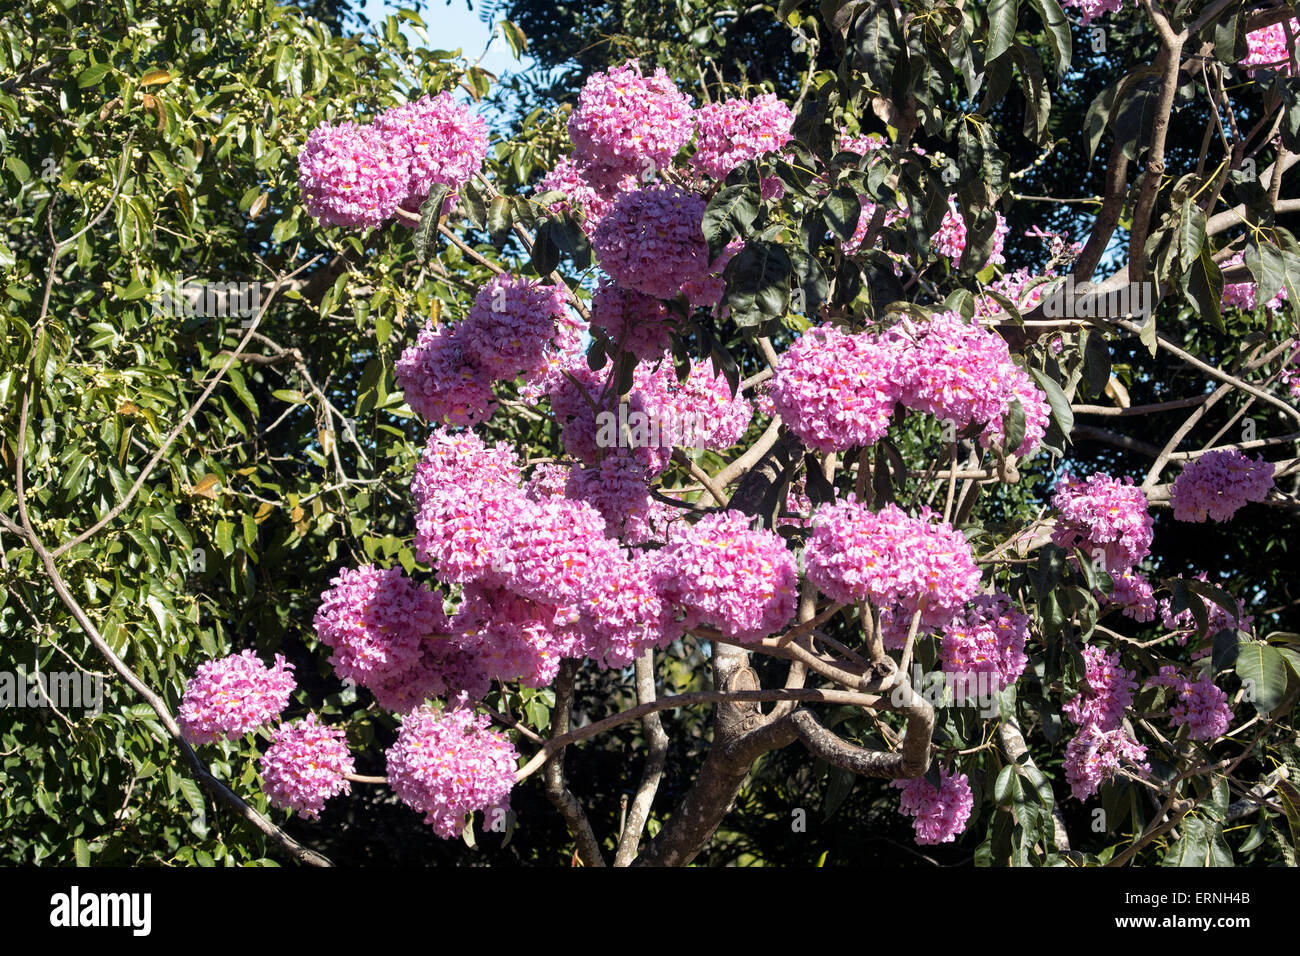 Large Clusters Of Bright Pink Flowers Of Tabebuia Impetiginosa Pink Trumpet Tree Against Dark Green Foliage In Australia Stock Photo Alamy